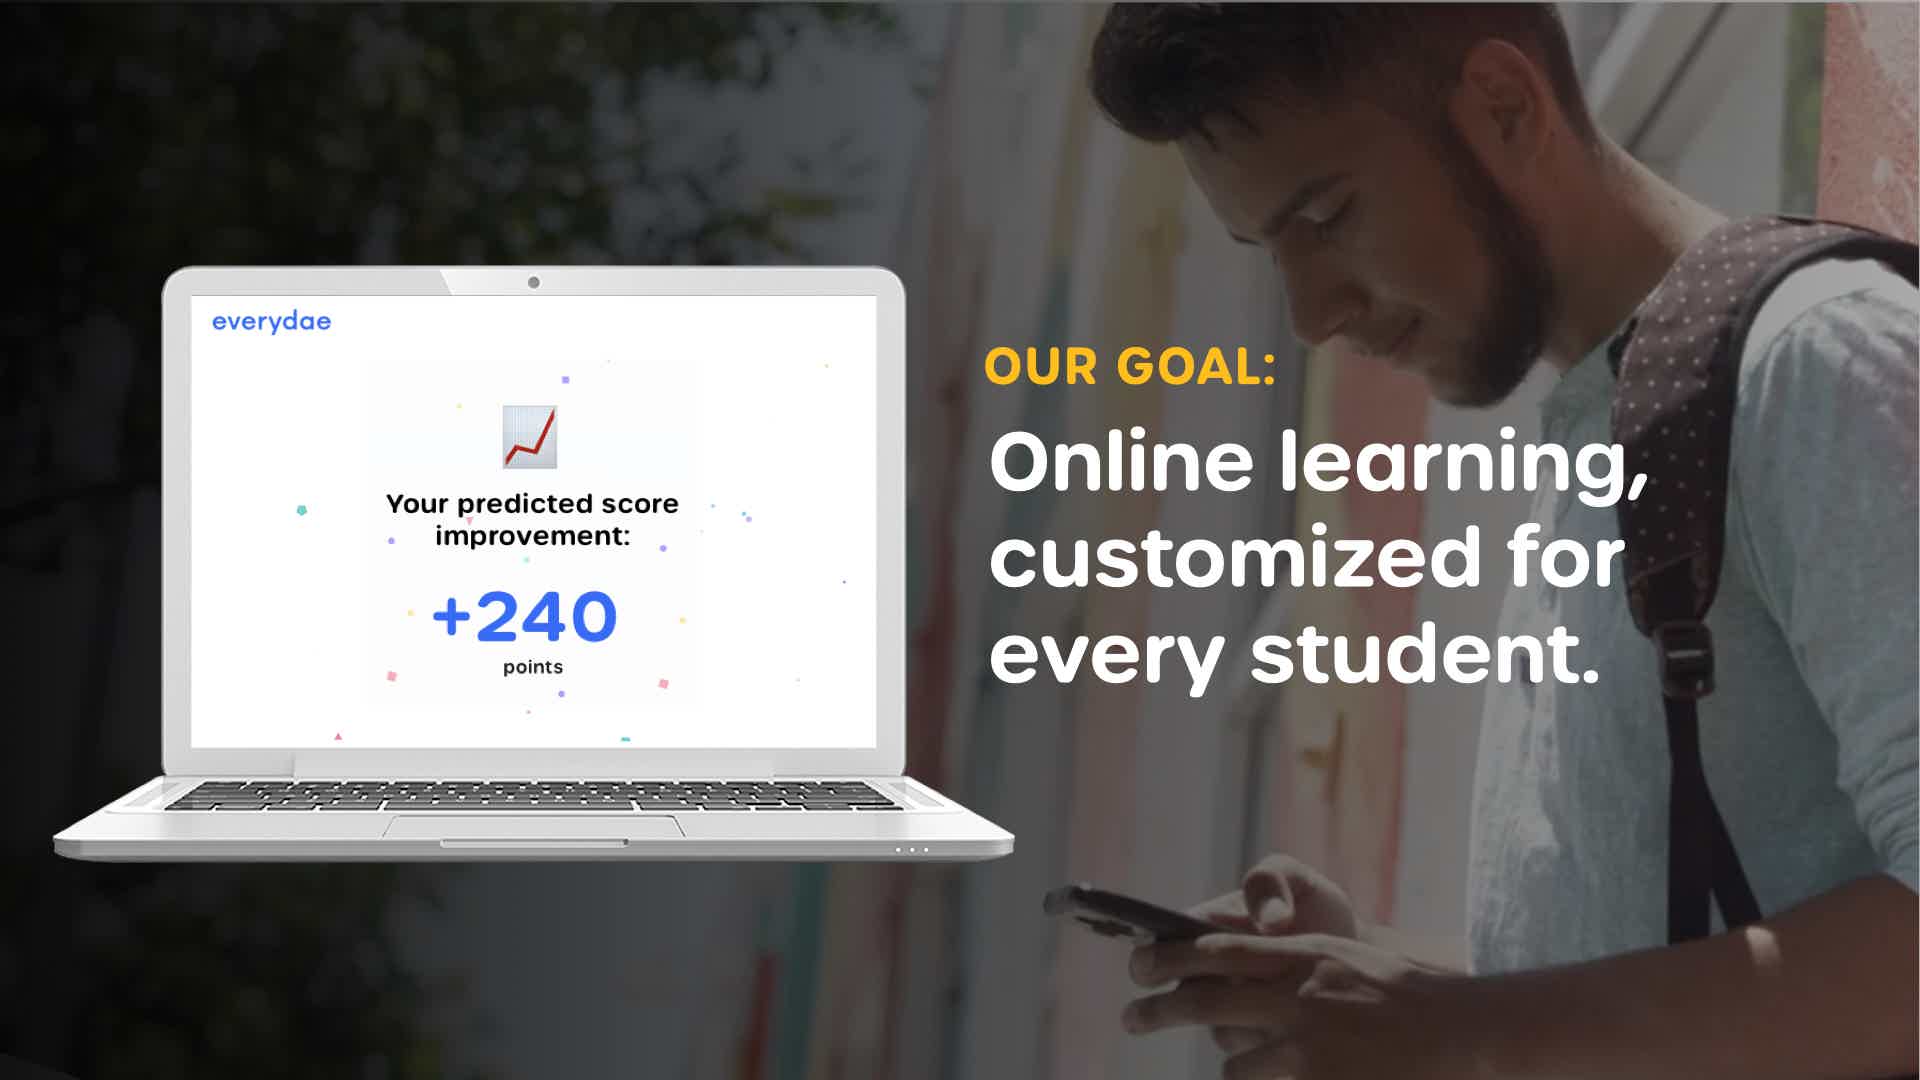 Our goal: online learning, customized for every student